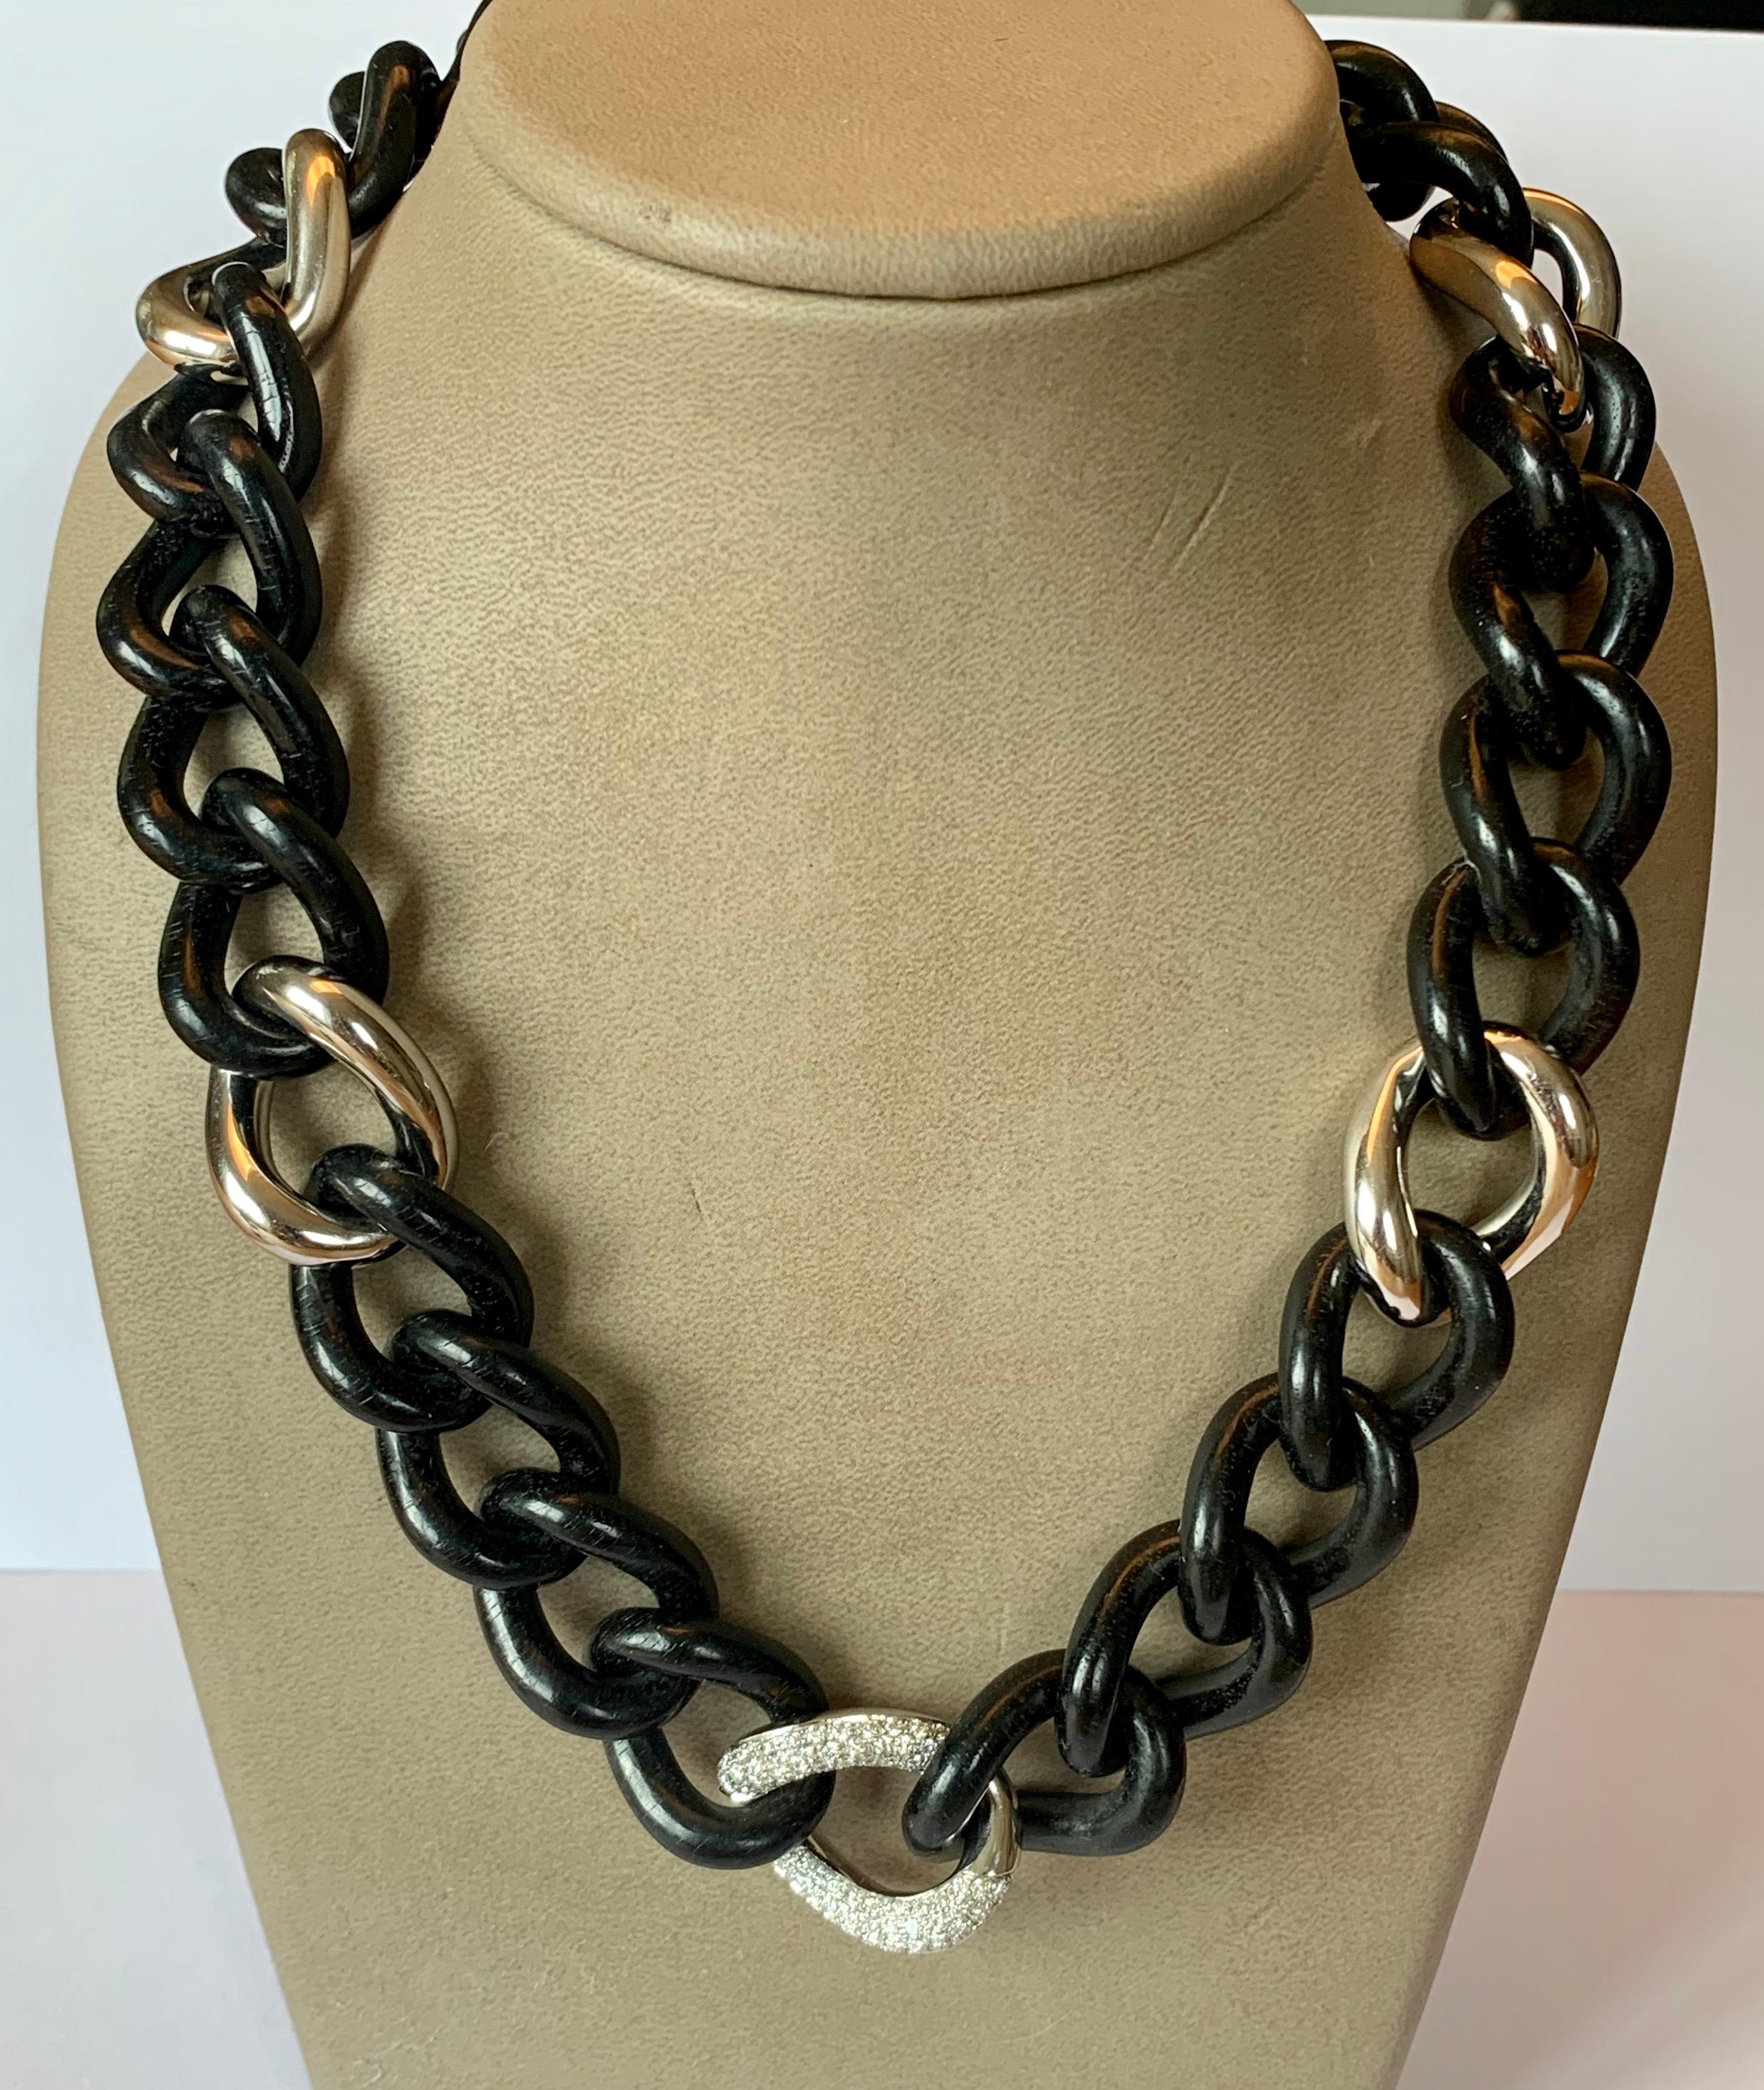 A Fine Italian 18 K white Gold and Ebony Groumette Chain Necklace, of which one link is highlighted with brilliant cut Diamonds weighing 1.62 ct.
 Nature and metal come together in this necklace where the brilliance of classic Groumette gold is